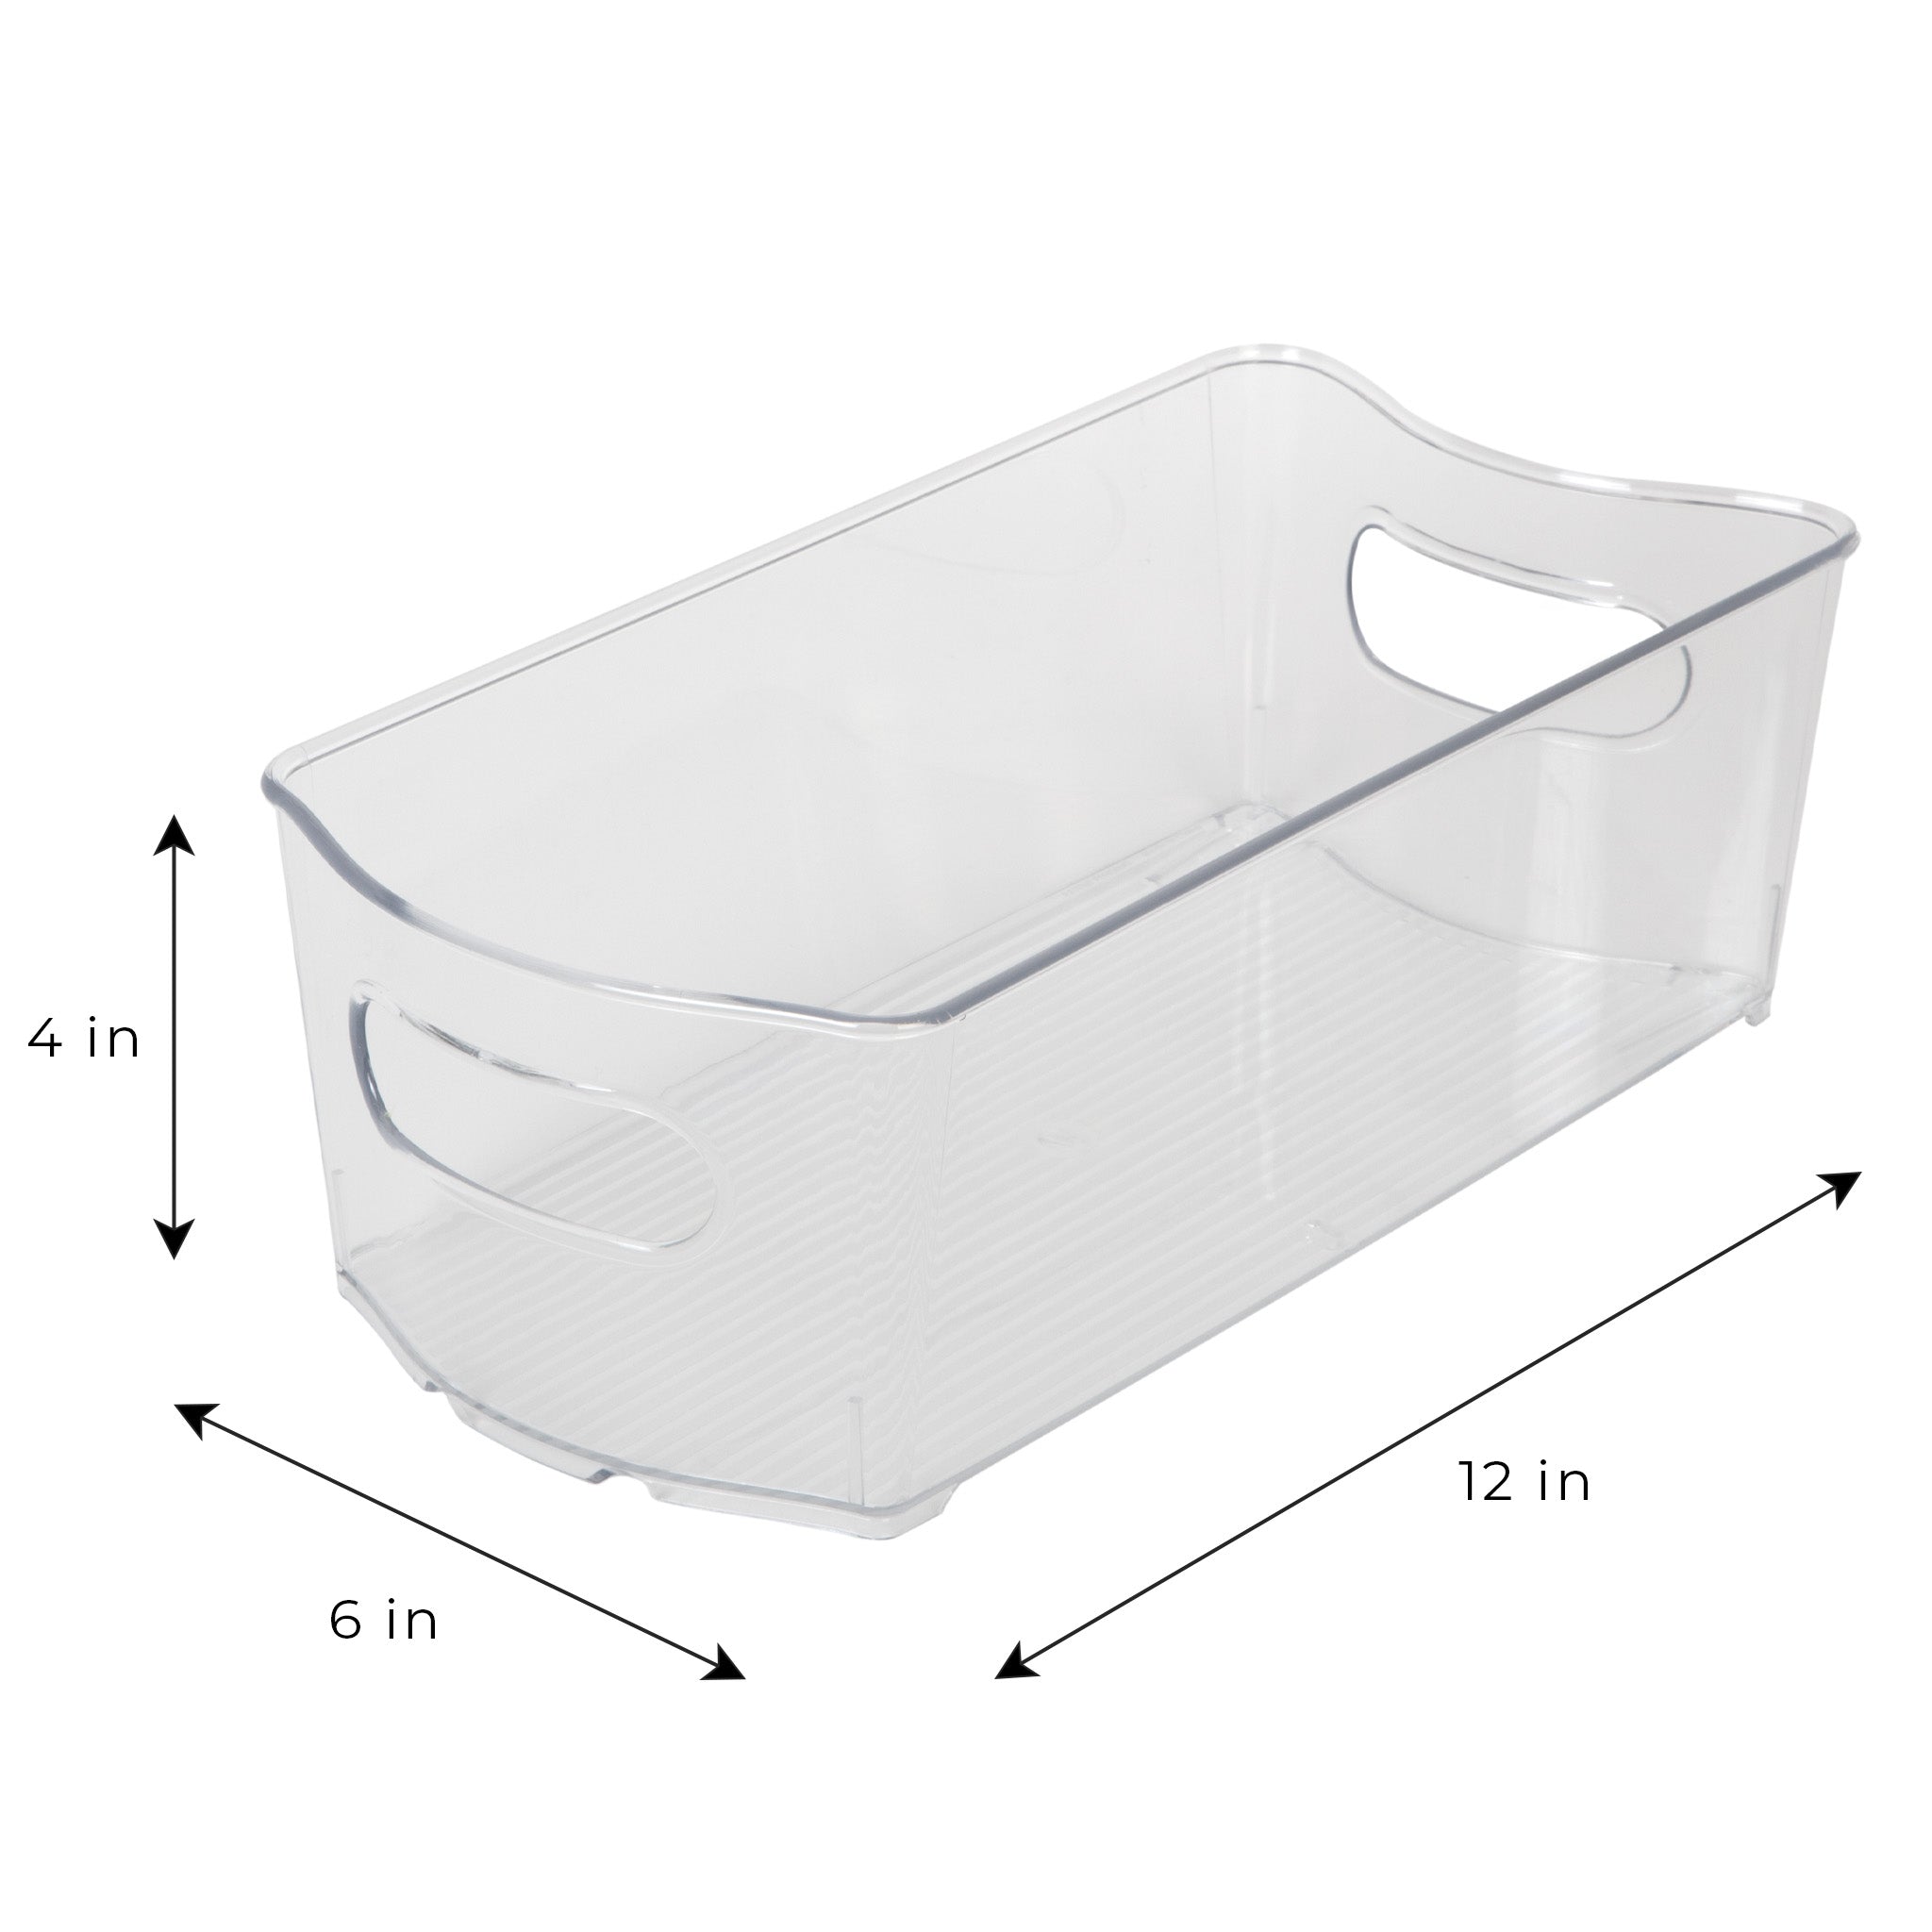 Stackable Clear Refrigerator Storage Bin with Handle - 8 pack - 6 x 12 inch - Smart Design® 4